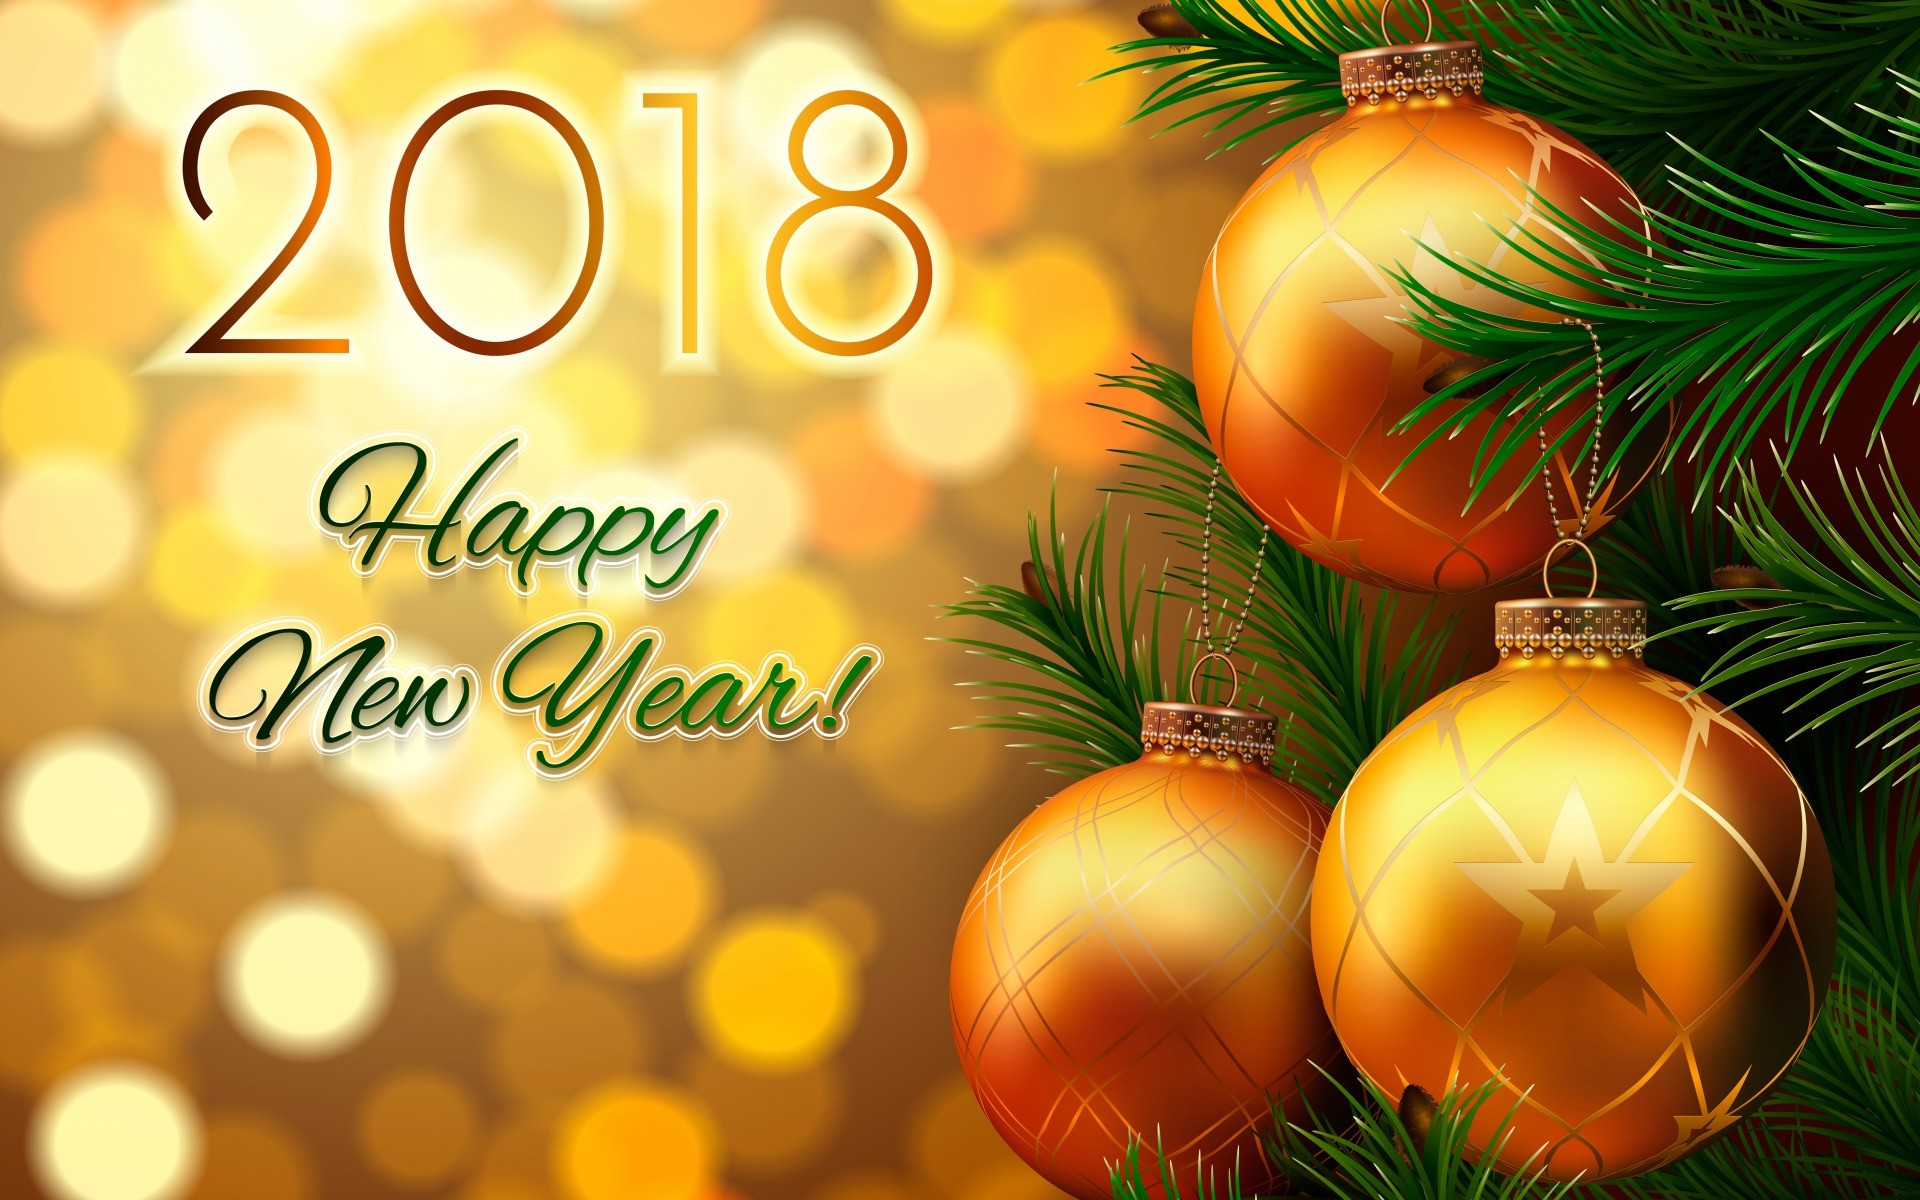 1920x1200 Christmas Ball And Happy New Year 2018 Wallpaper 27518